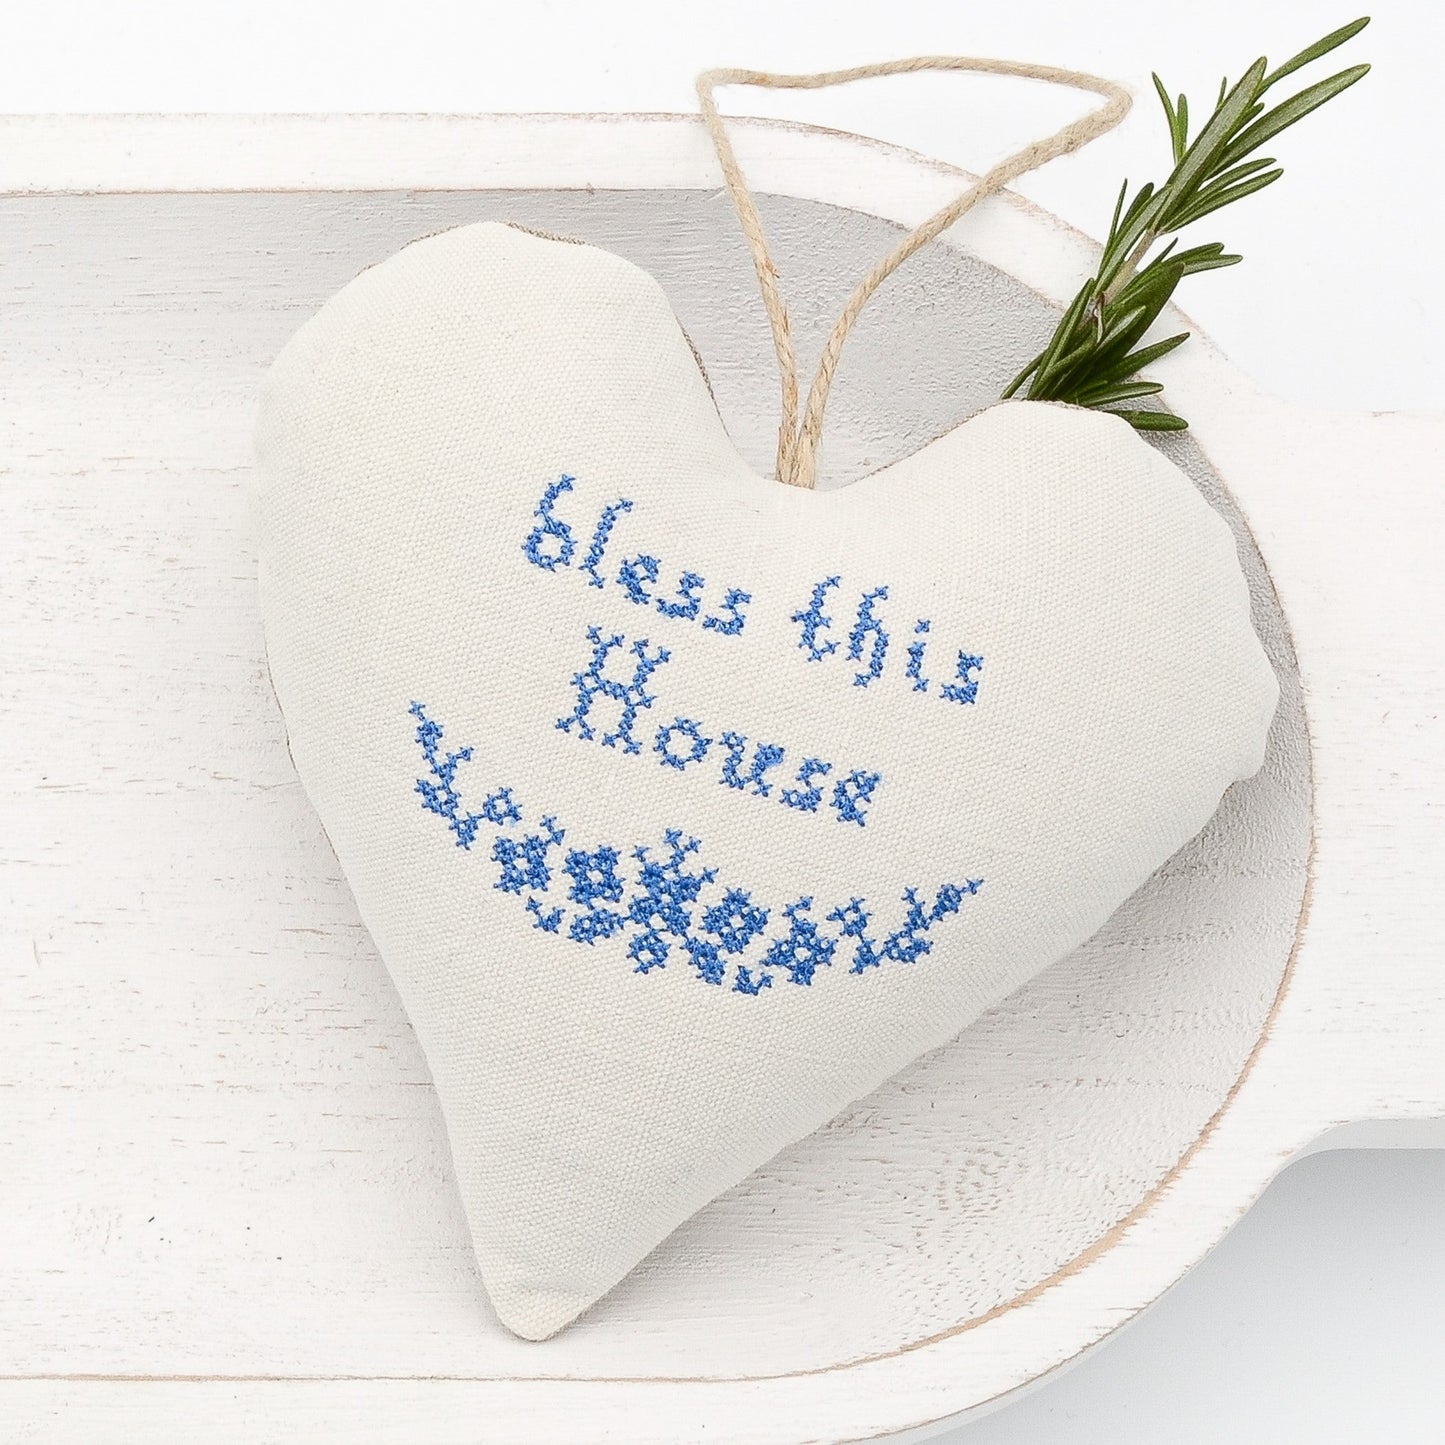 Antique European white linen lavender sachet heart, "bless this House" and garland embroidered in blue cross stitch, hemp twine tie, filled with high quality lavender from Provence France